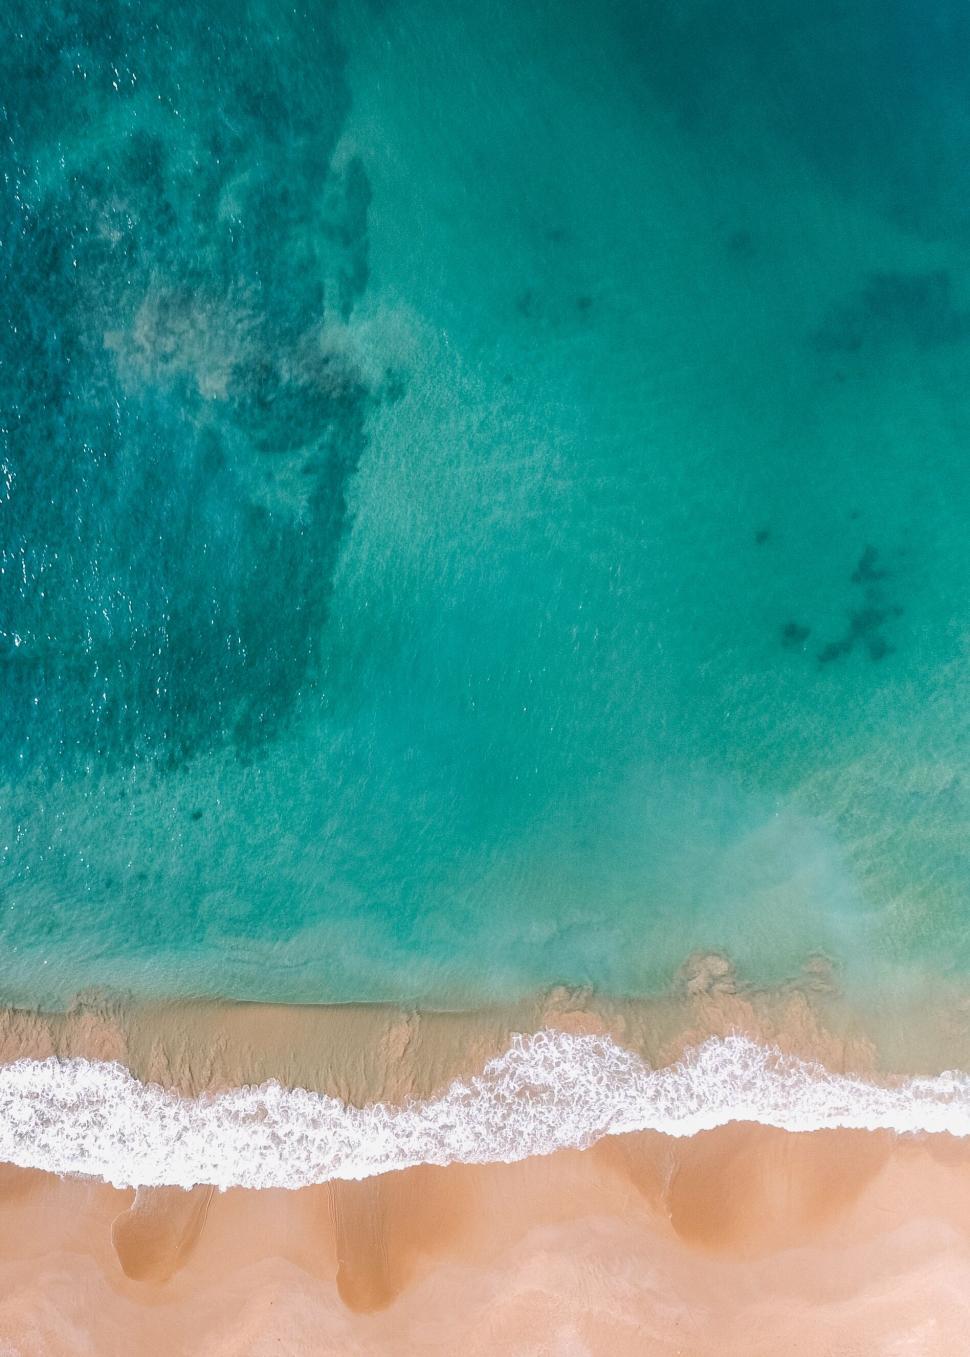 Free Image of Aerial view of beach and ocean waves 